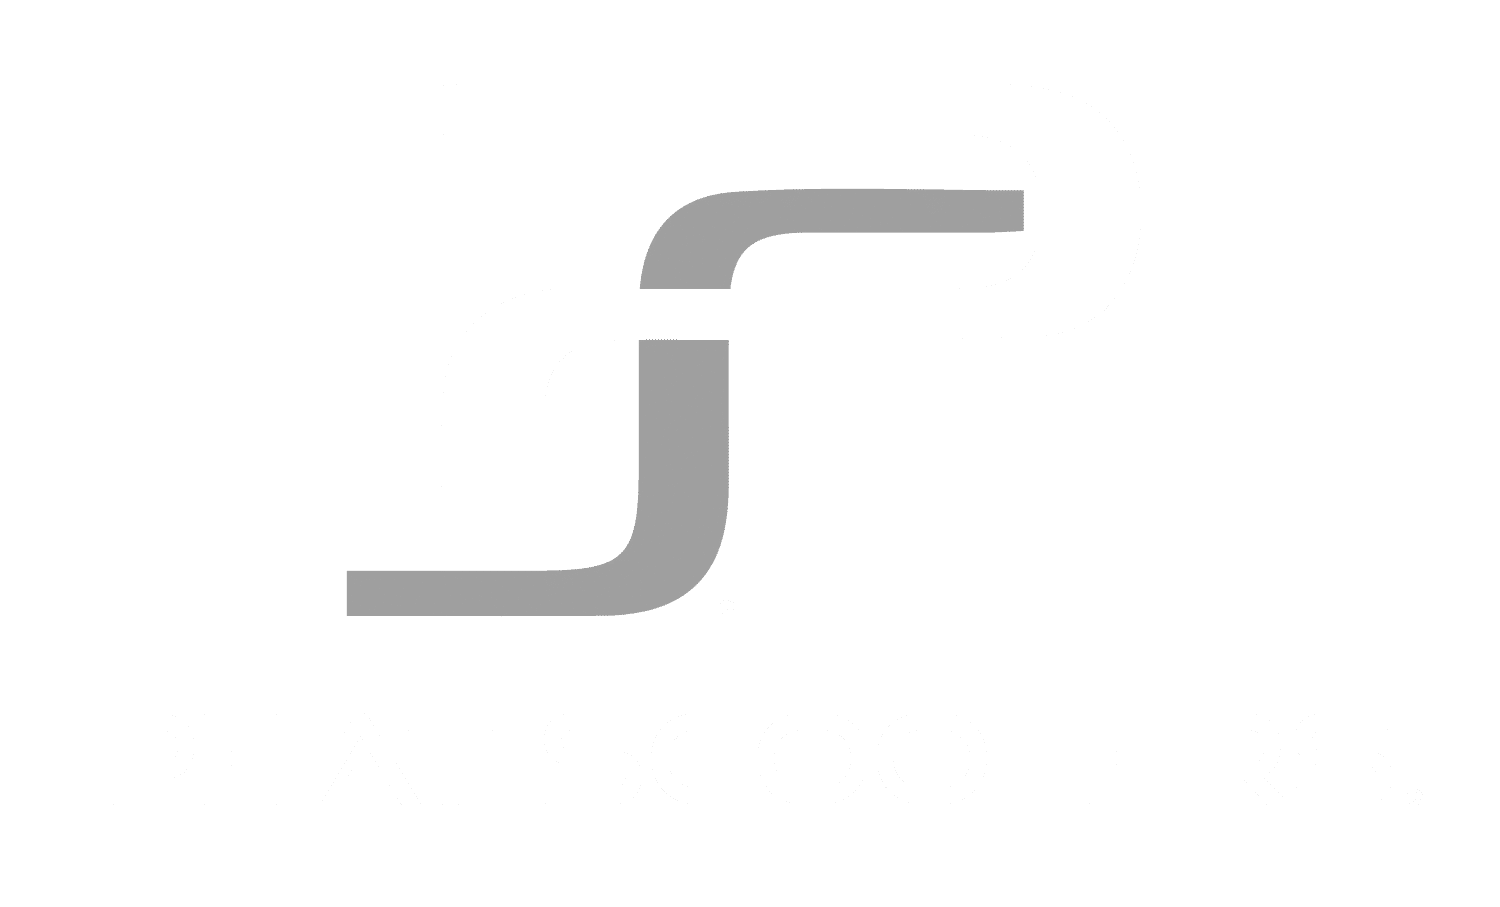 phat scooters grayscale